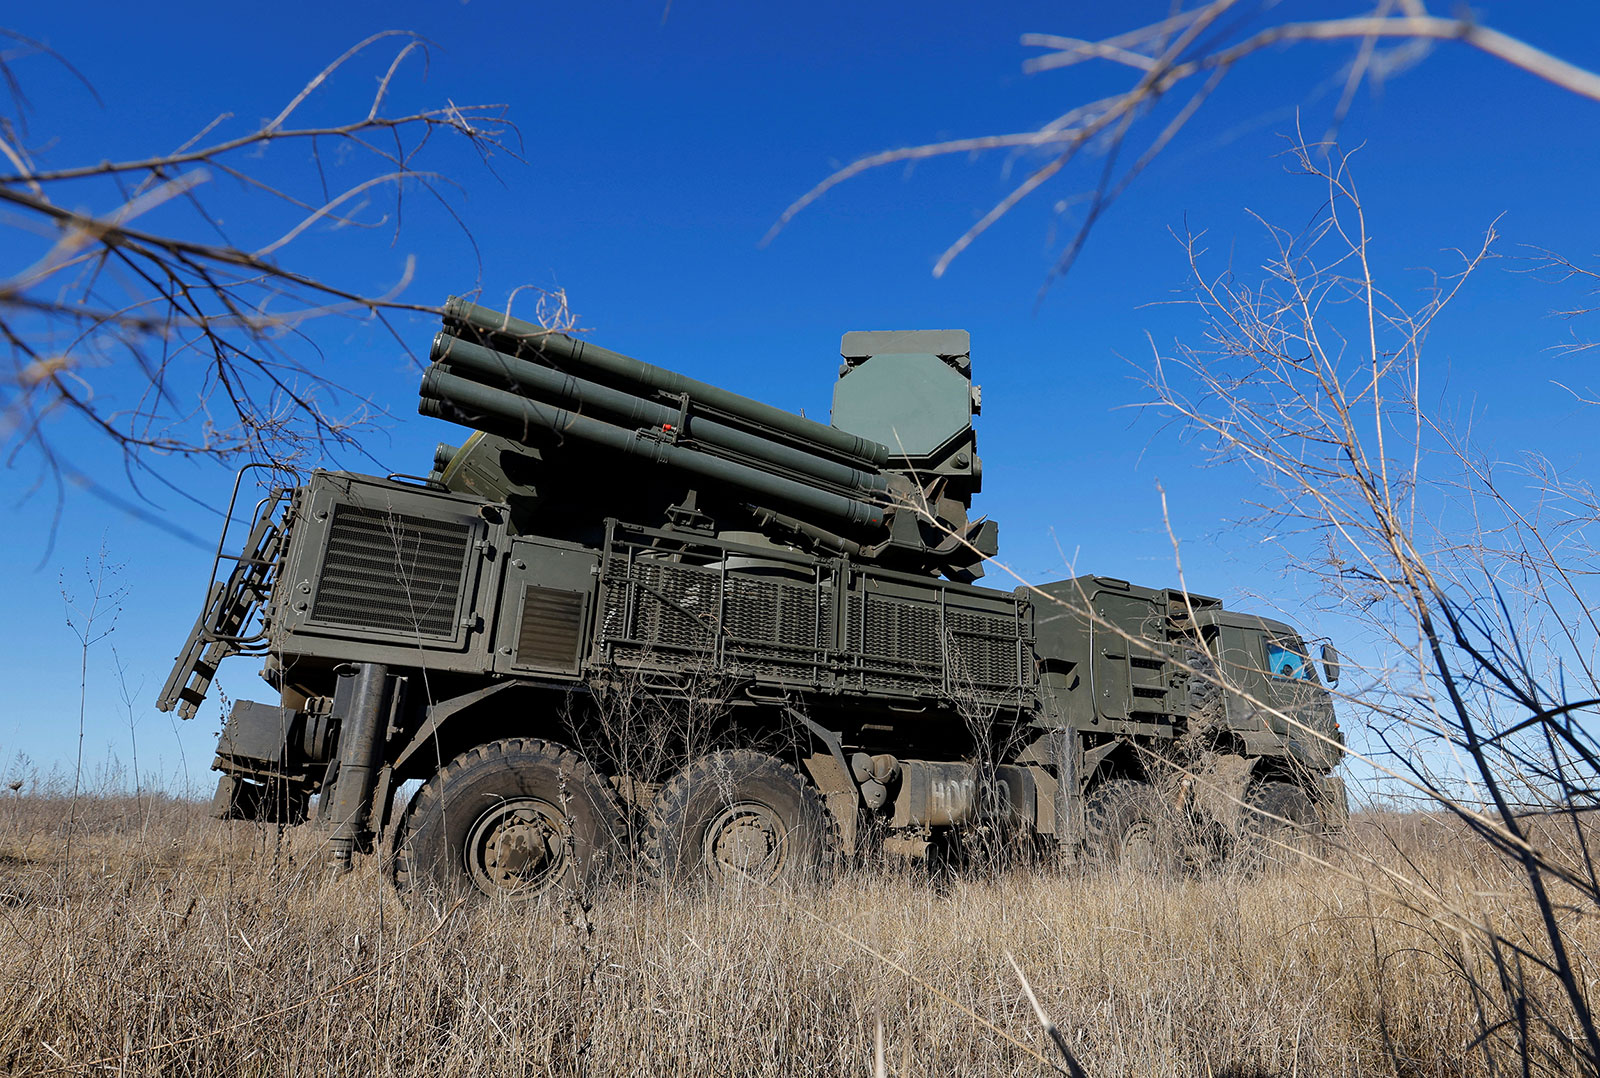 A Russian anti-aircraft missile system is seen in the Luhansk region of Ukraine on January 25.